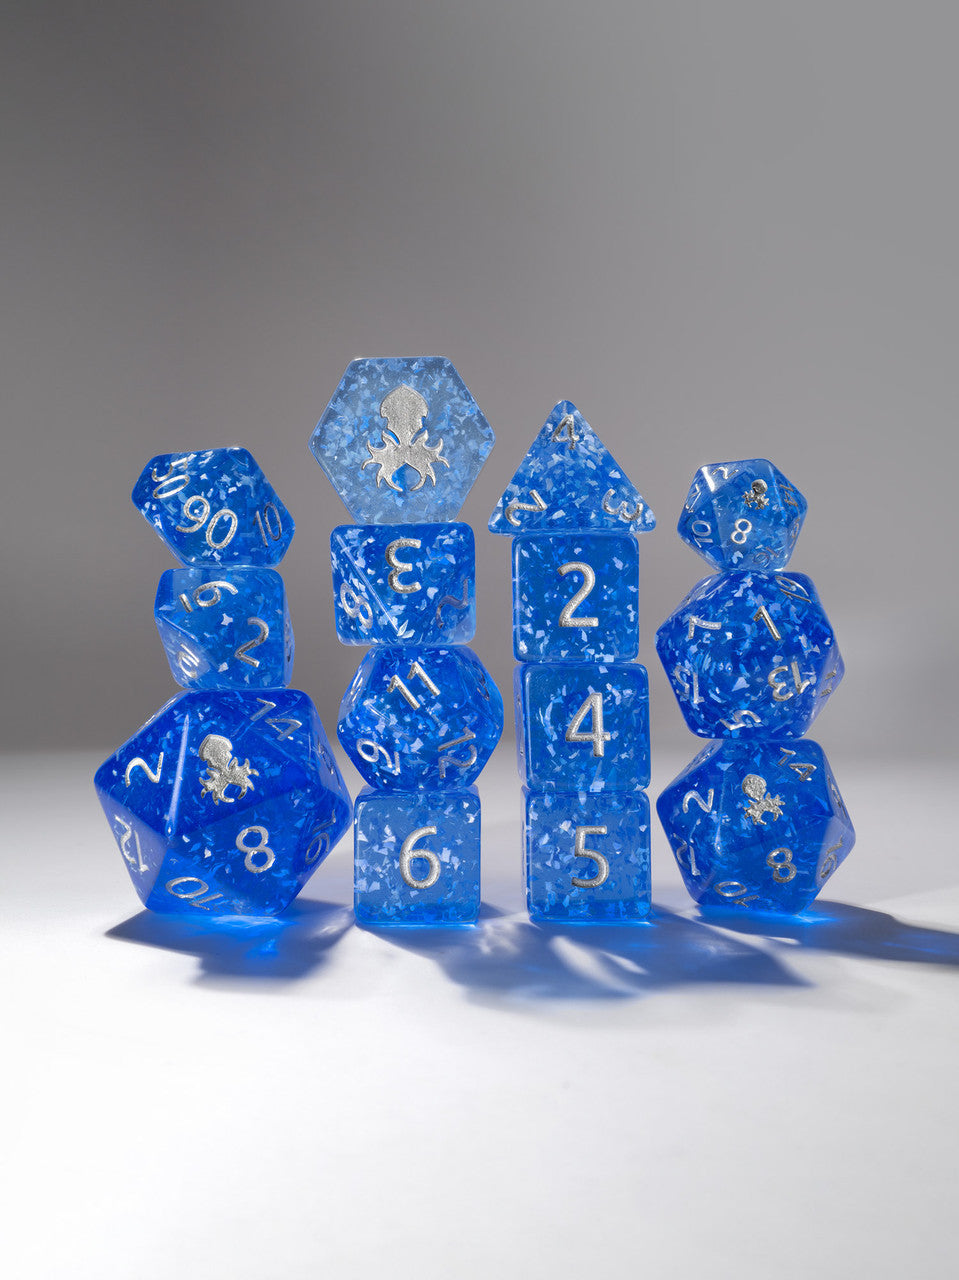 Nash: Shattered Theorem 14pc Limited Edition Polyhedral Dice Set